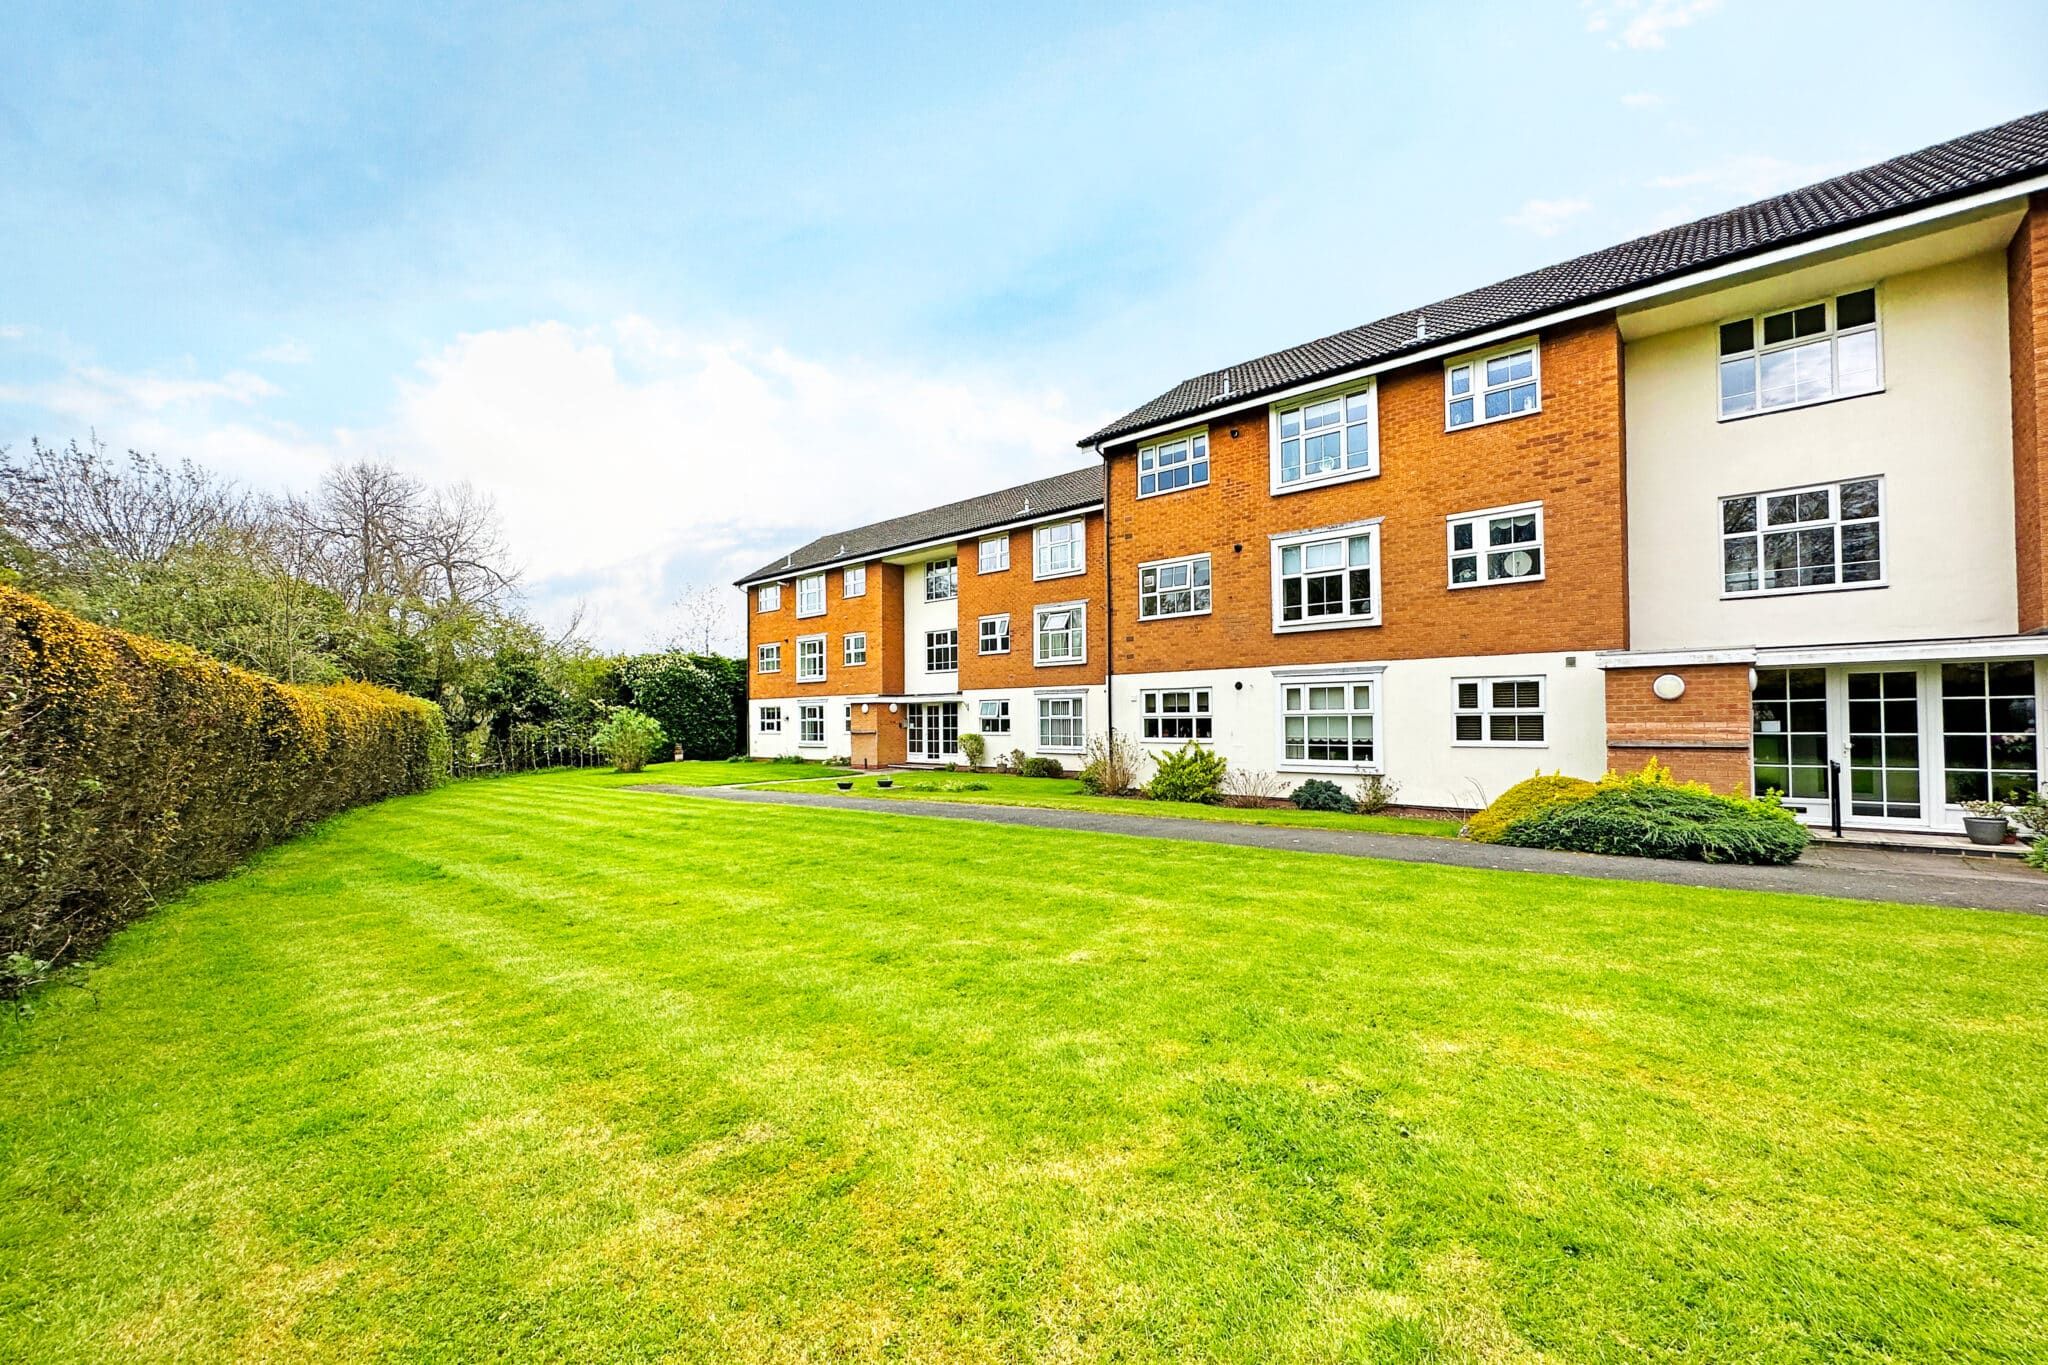 Flat 3, Starbold Court Starbold Crescent, Solihull, Knowle, B93 9LB